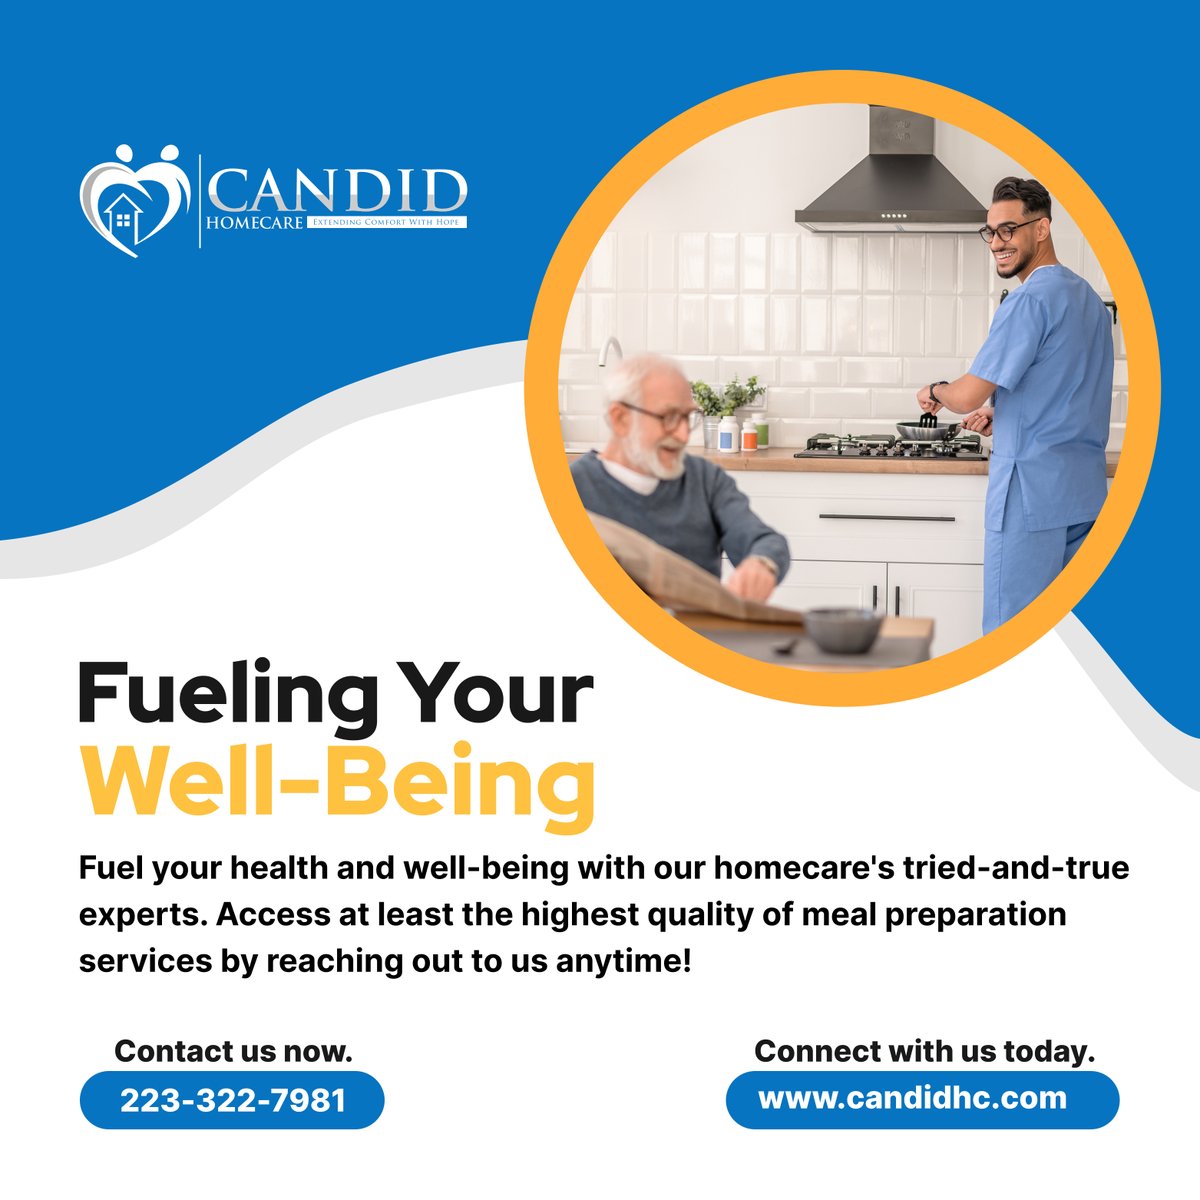 If you need help with preparing healthy meals, you don't need to look any further for assistance. That's because you are sure to find all your meal preparation needs with Candid Home Care, Inc.! Contact us for more details! 

#HenricoVirginia #MealPreparation #Homecare